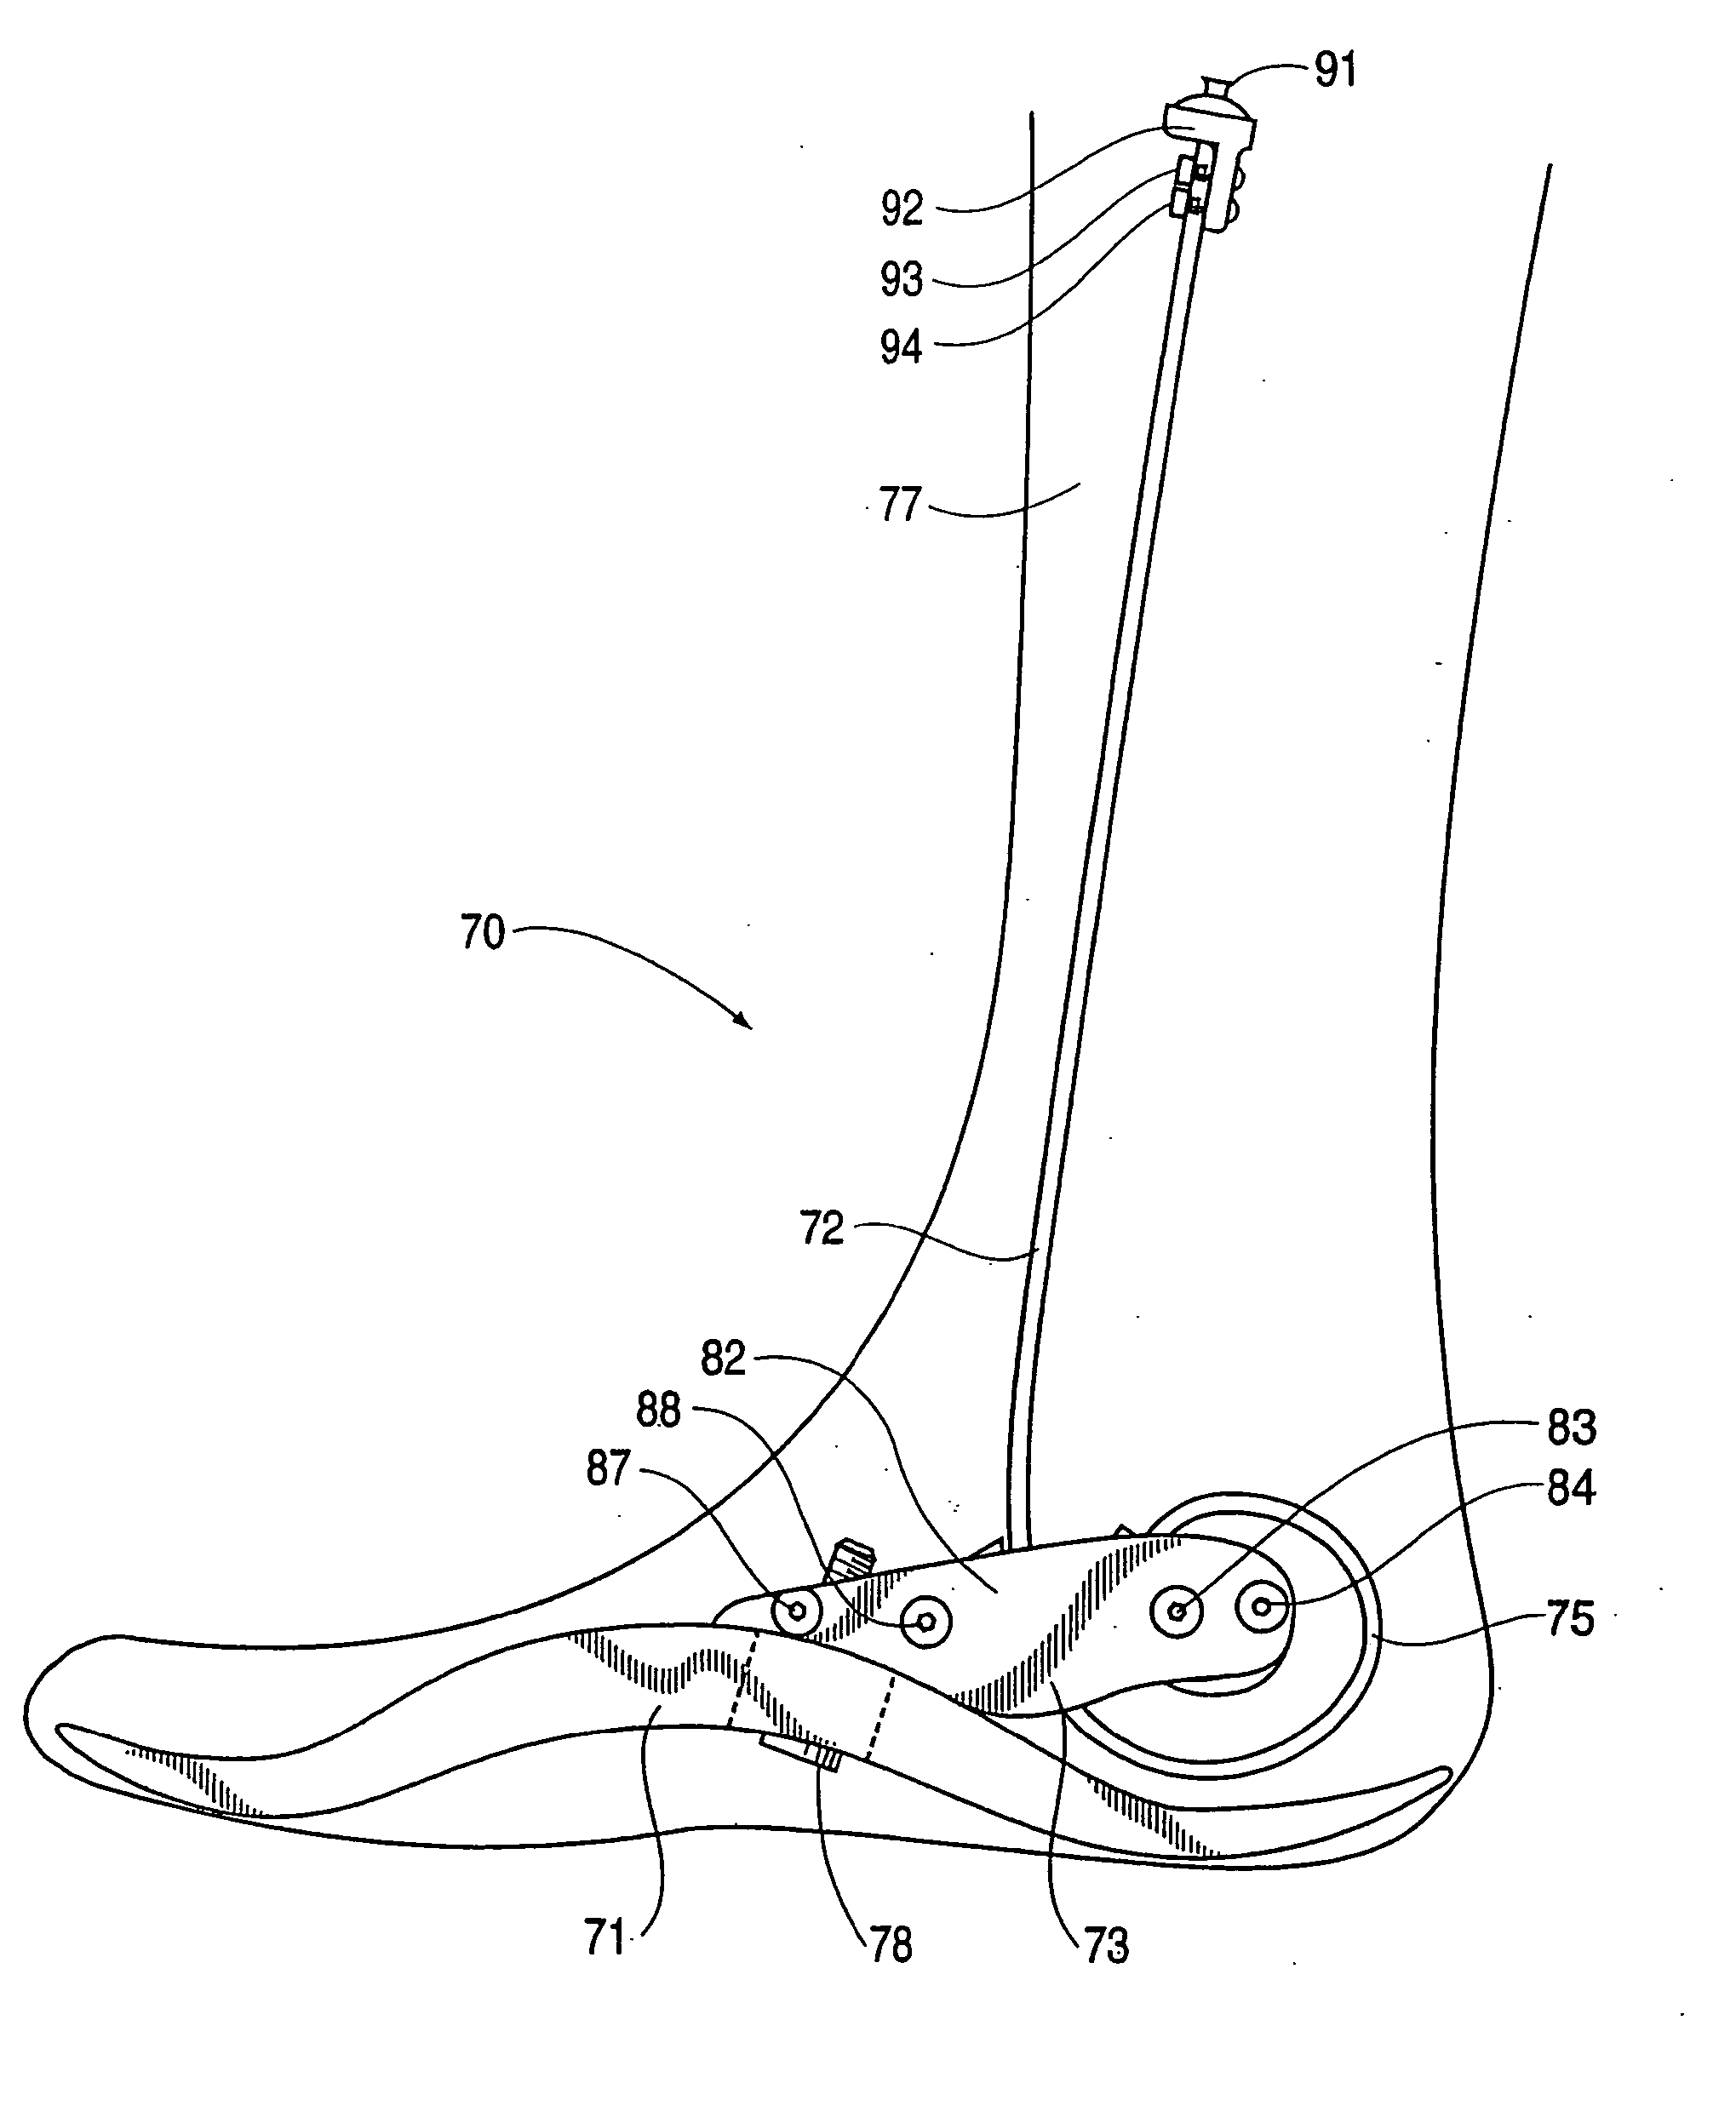 Prosthetic foot with tunable performance